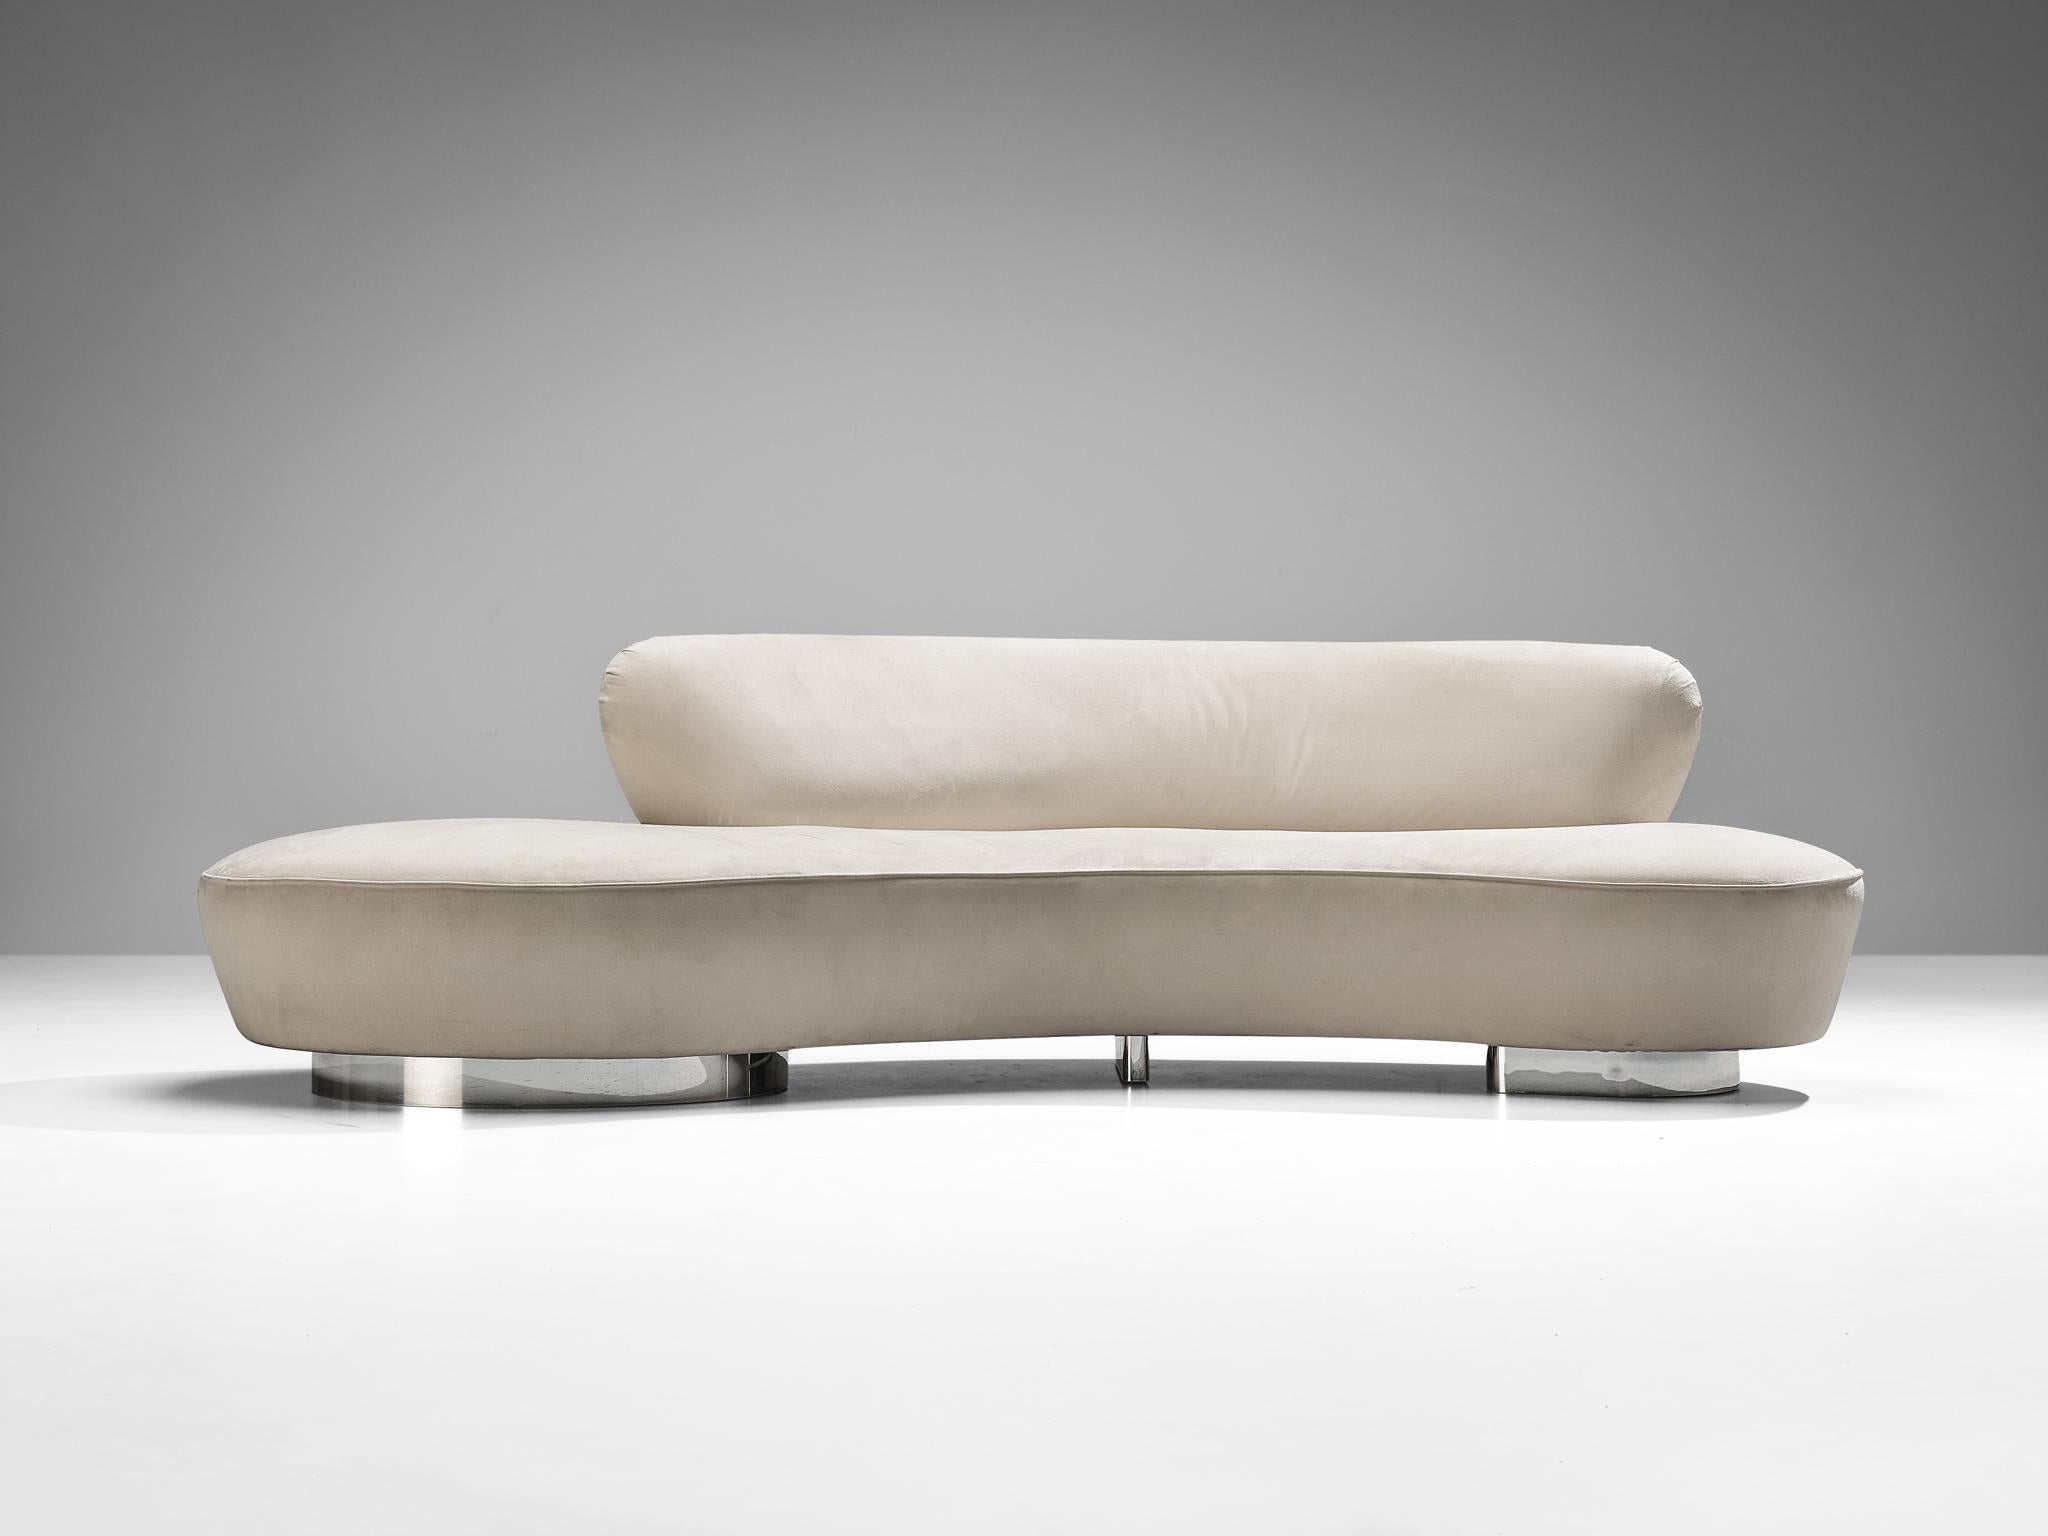 American Iconic Vladimir Kagan ‘Serpentine’ Sofa and Ottoman in Off-White Upholstery